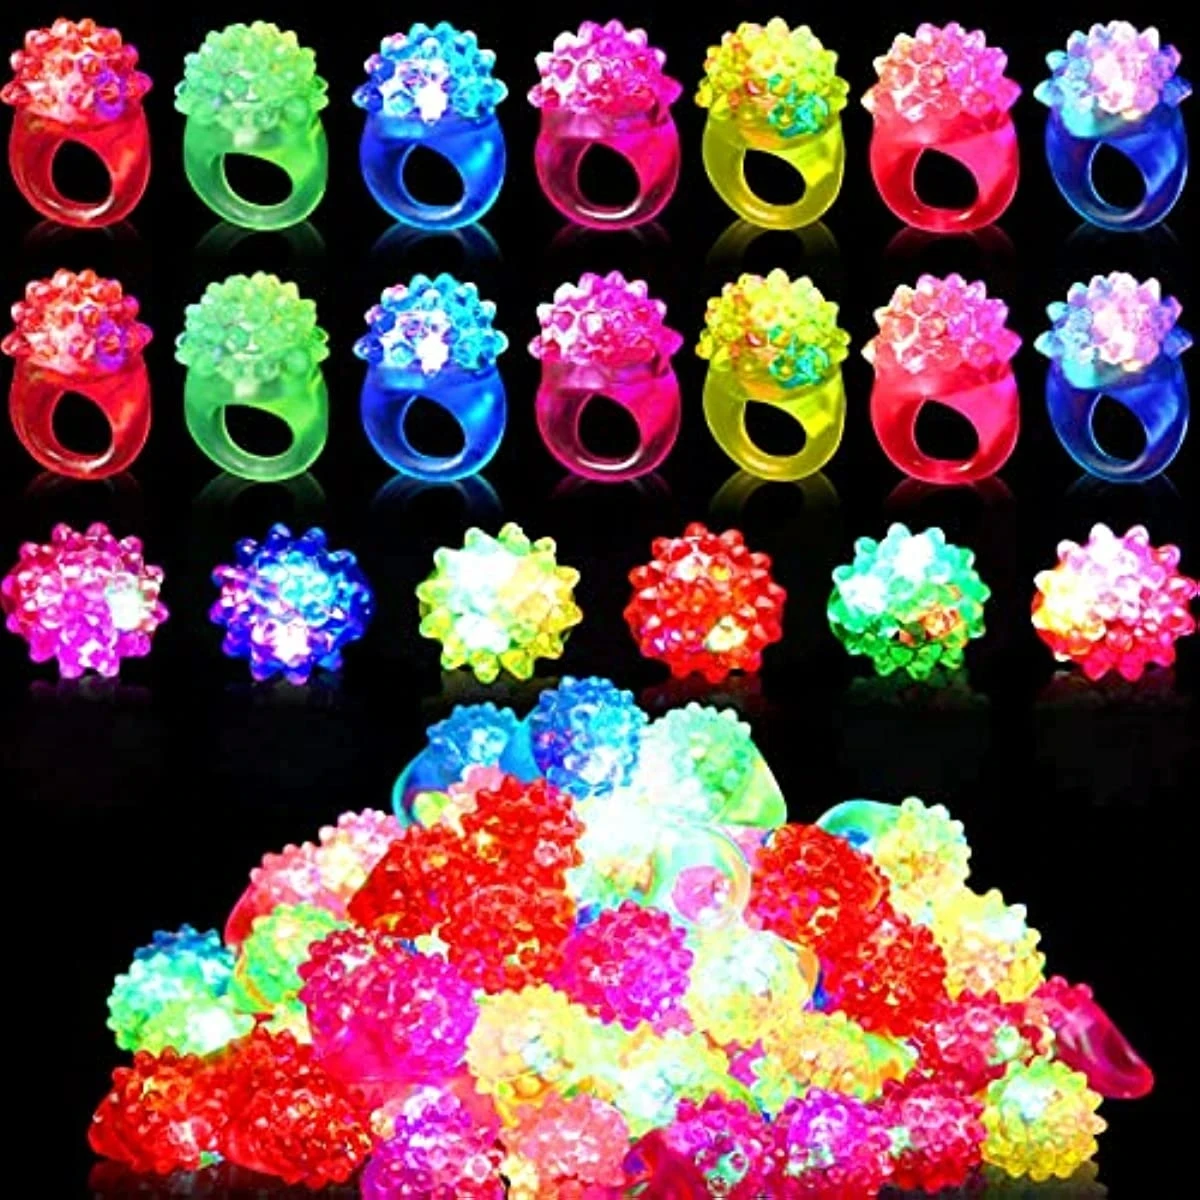 

10/20/30/50/60 Pcs Glowing Rings LED Light Up Luminous Rings Party Favor Toys Flash Led Lights Glow In The Dark Party Supplies